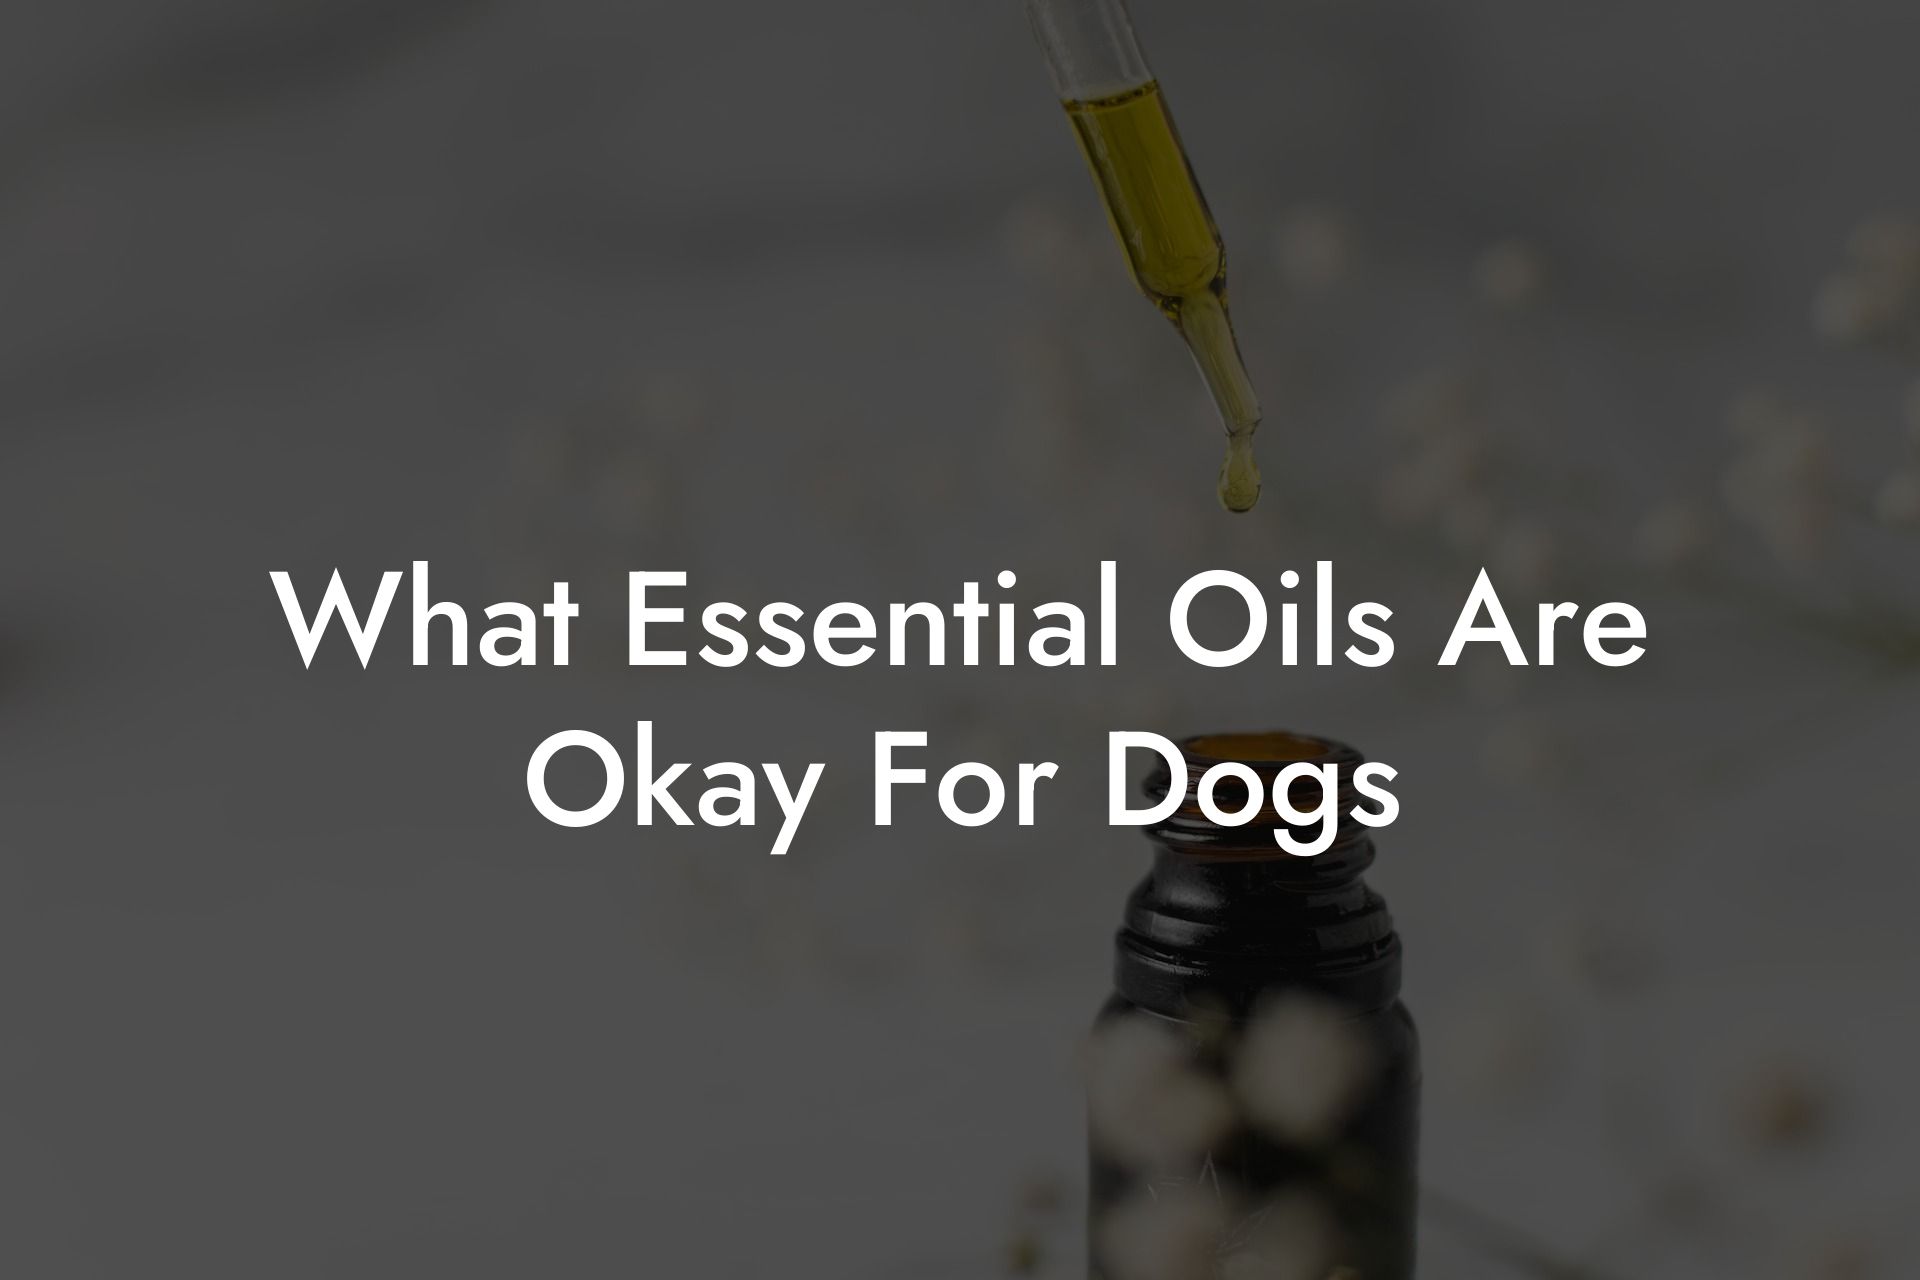 What Essential Oils Are Okay For Dogs